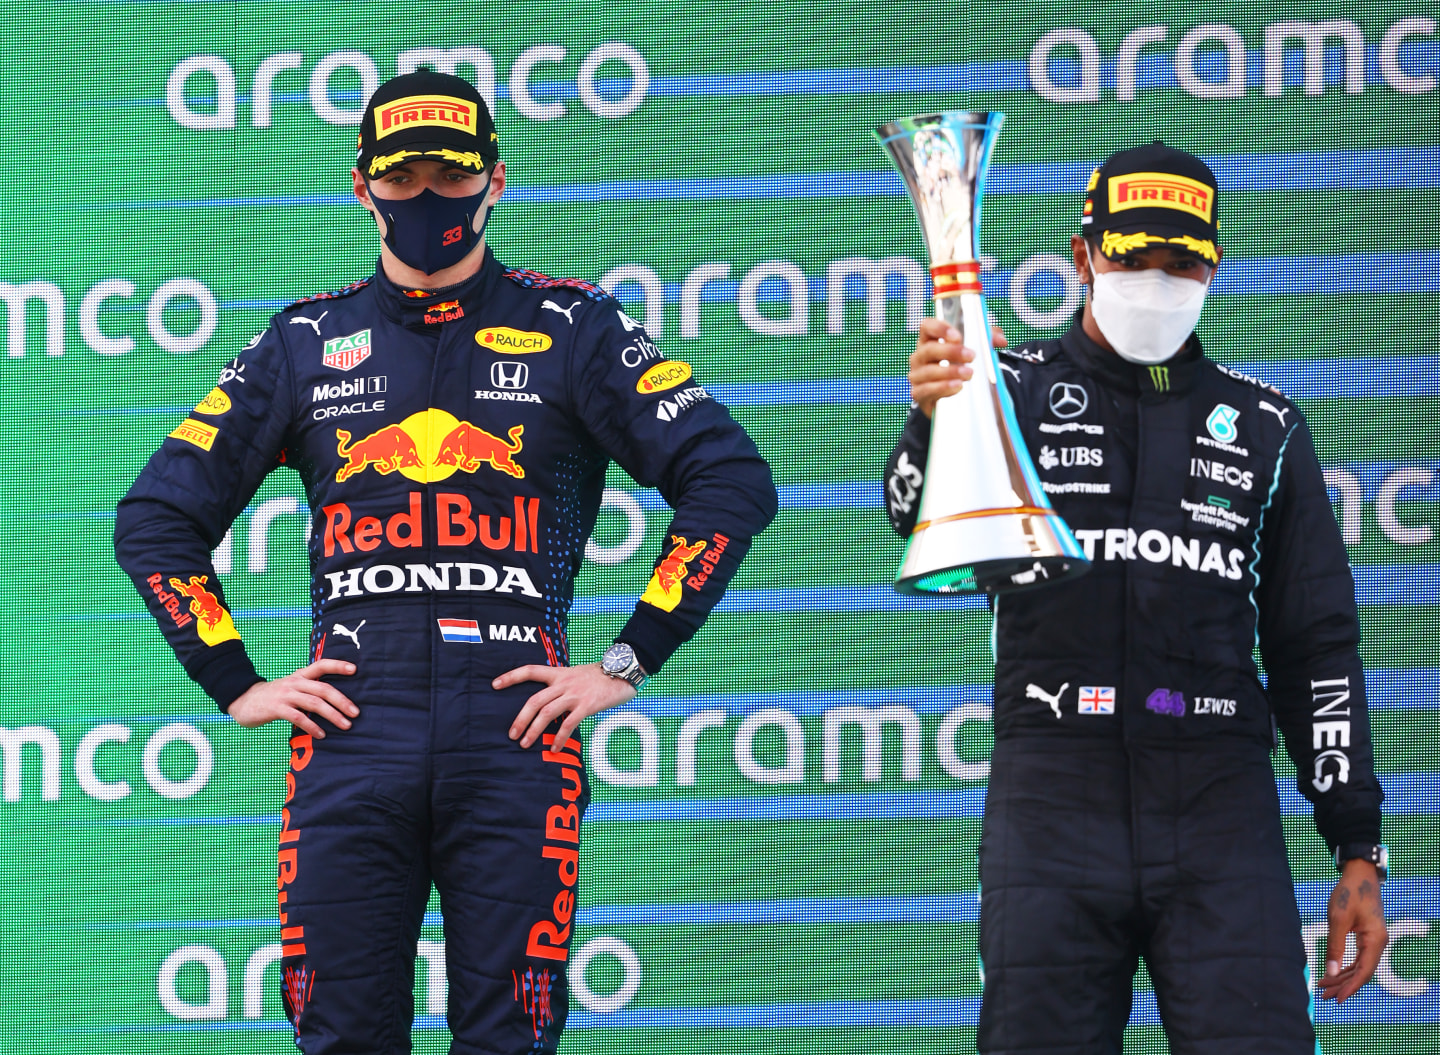 BARCELONA, SPAIN - MAY 09: Race winner Lewis Hamilton of Great Britain and Mercedes GP and second placed Max Verstappen of Netherlands and Red Bull Racing celebrate with sparkling wine on the podium during the F1 Grand Prix of Spain at Circuit de Barcelona-Catalunya on May 09, 2021 in Barcelona, Spain. (Photo by Bryn Lennon/Getty Images)